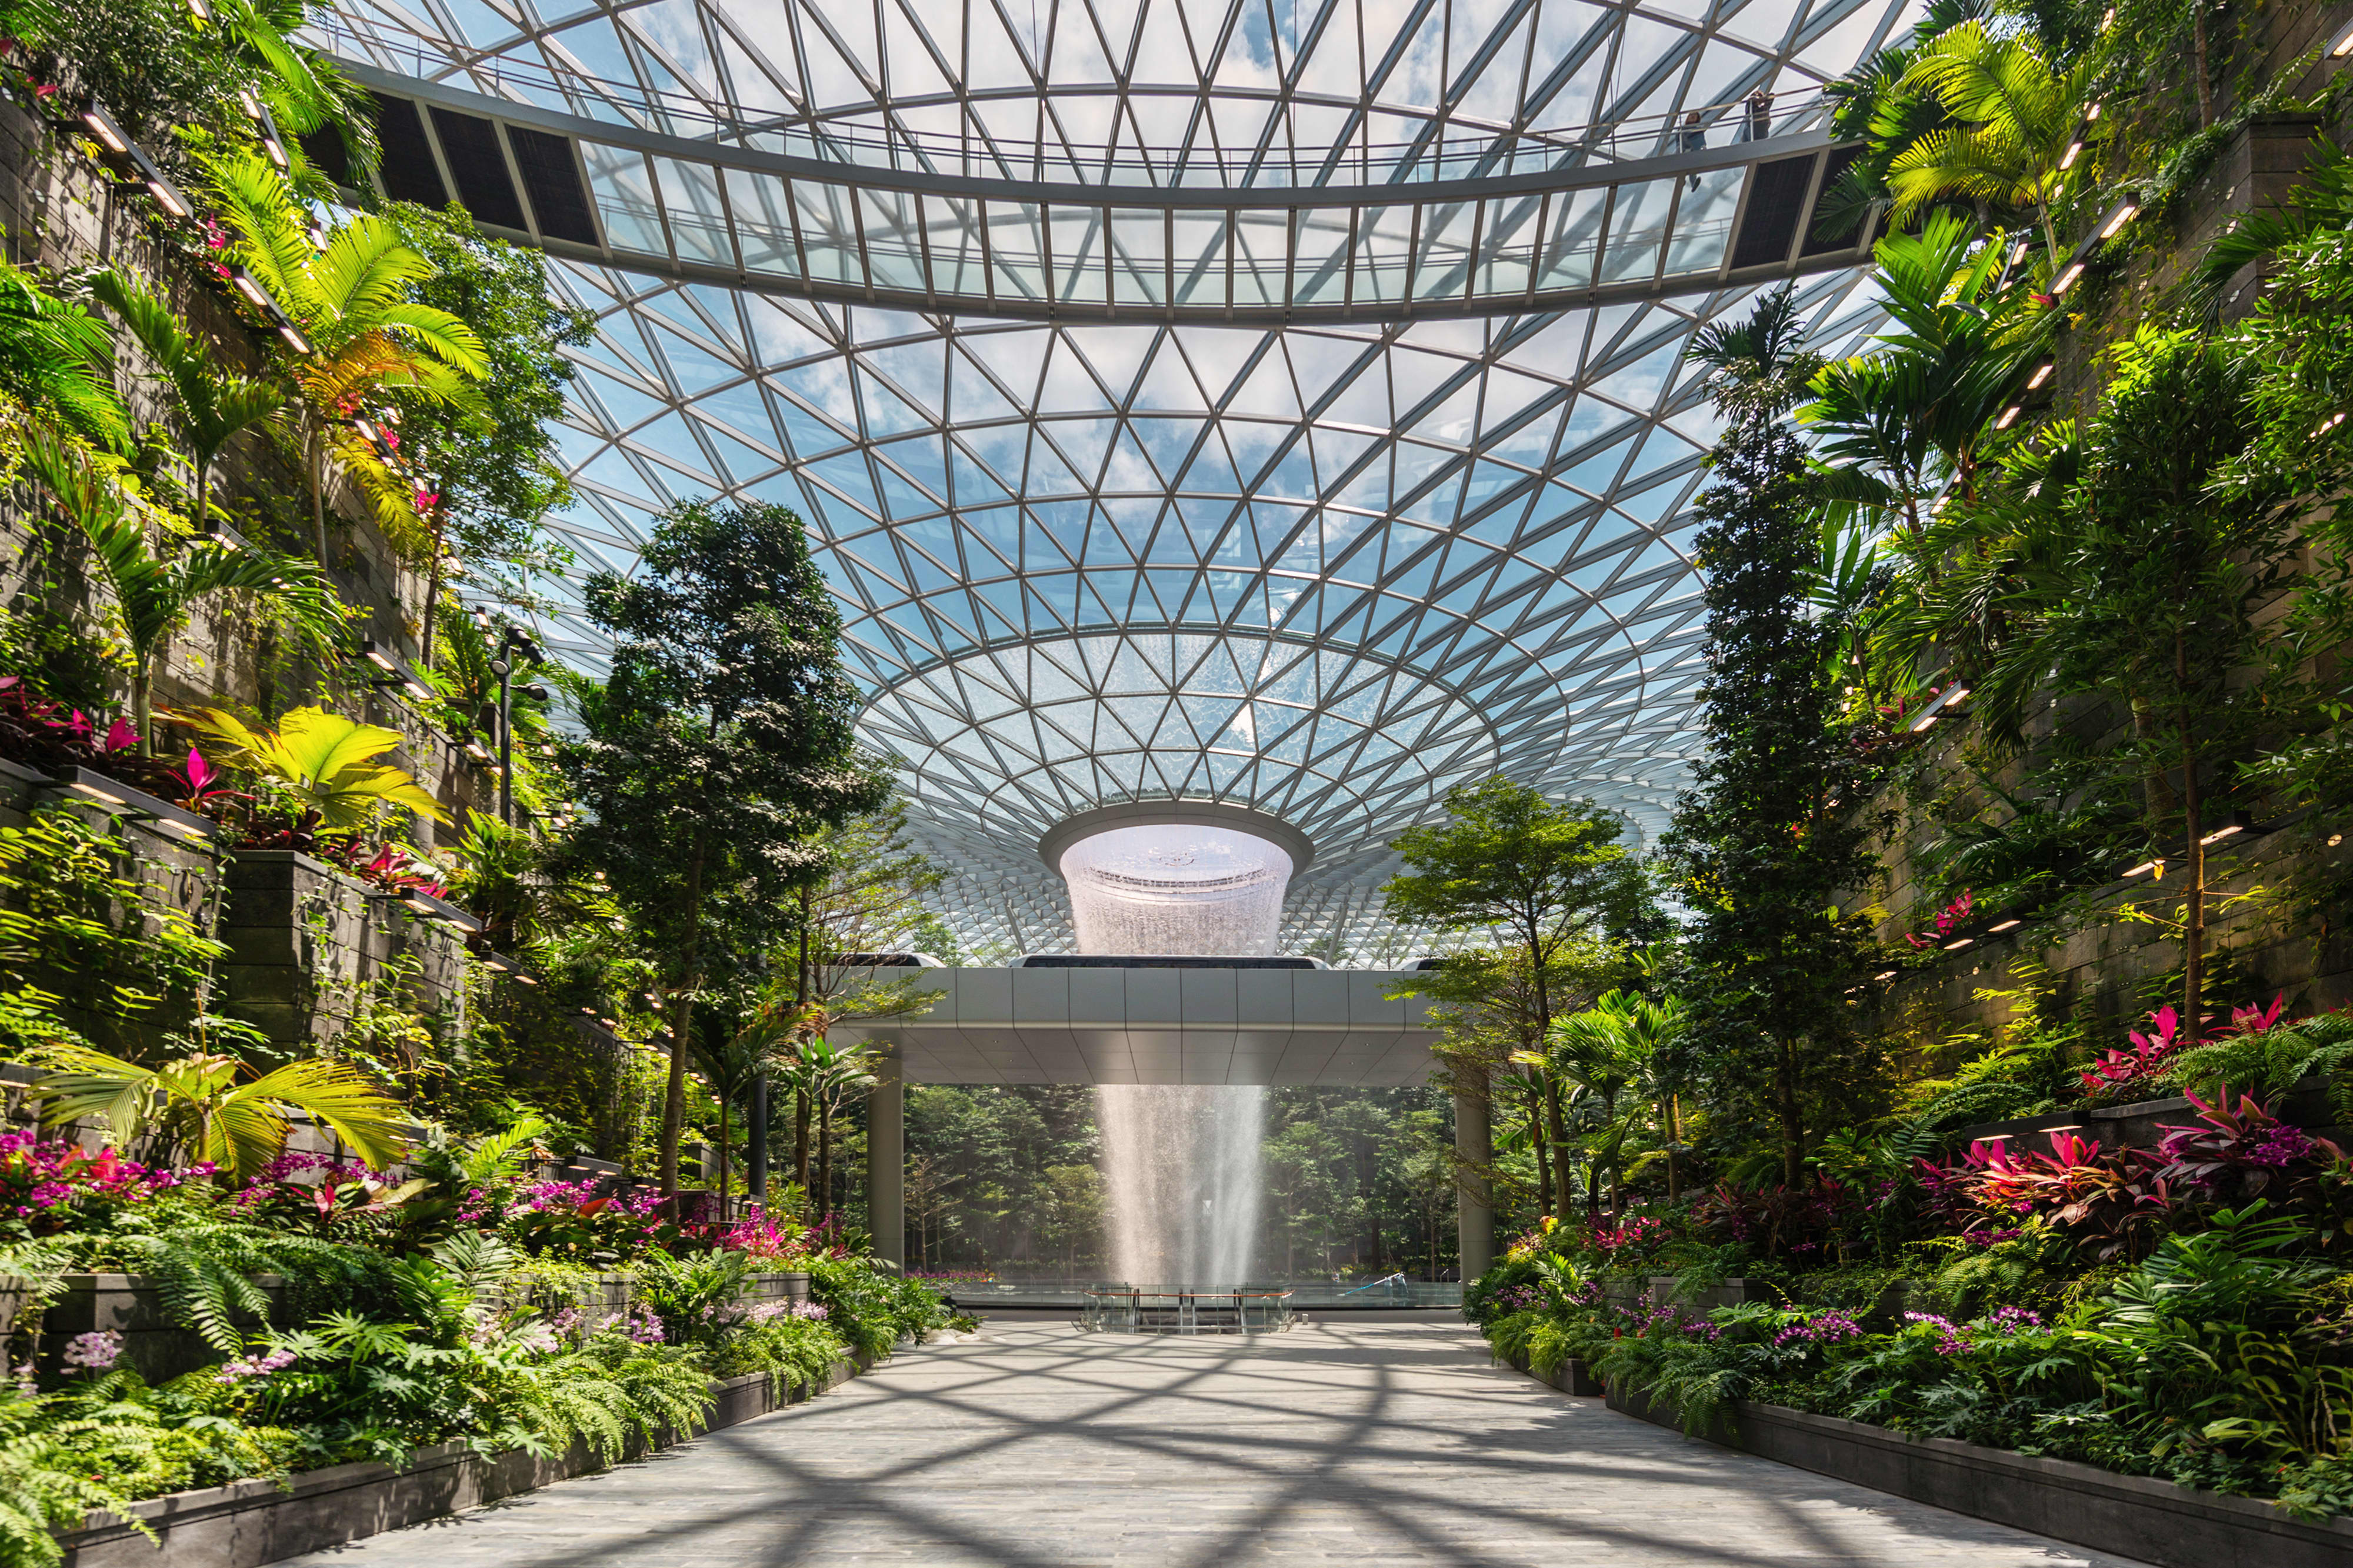 Vulgaridad doble Forma del barco Singapore's Changi Airport touts the world's tallest indoor waterfall